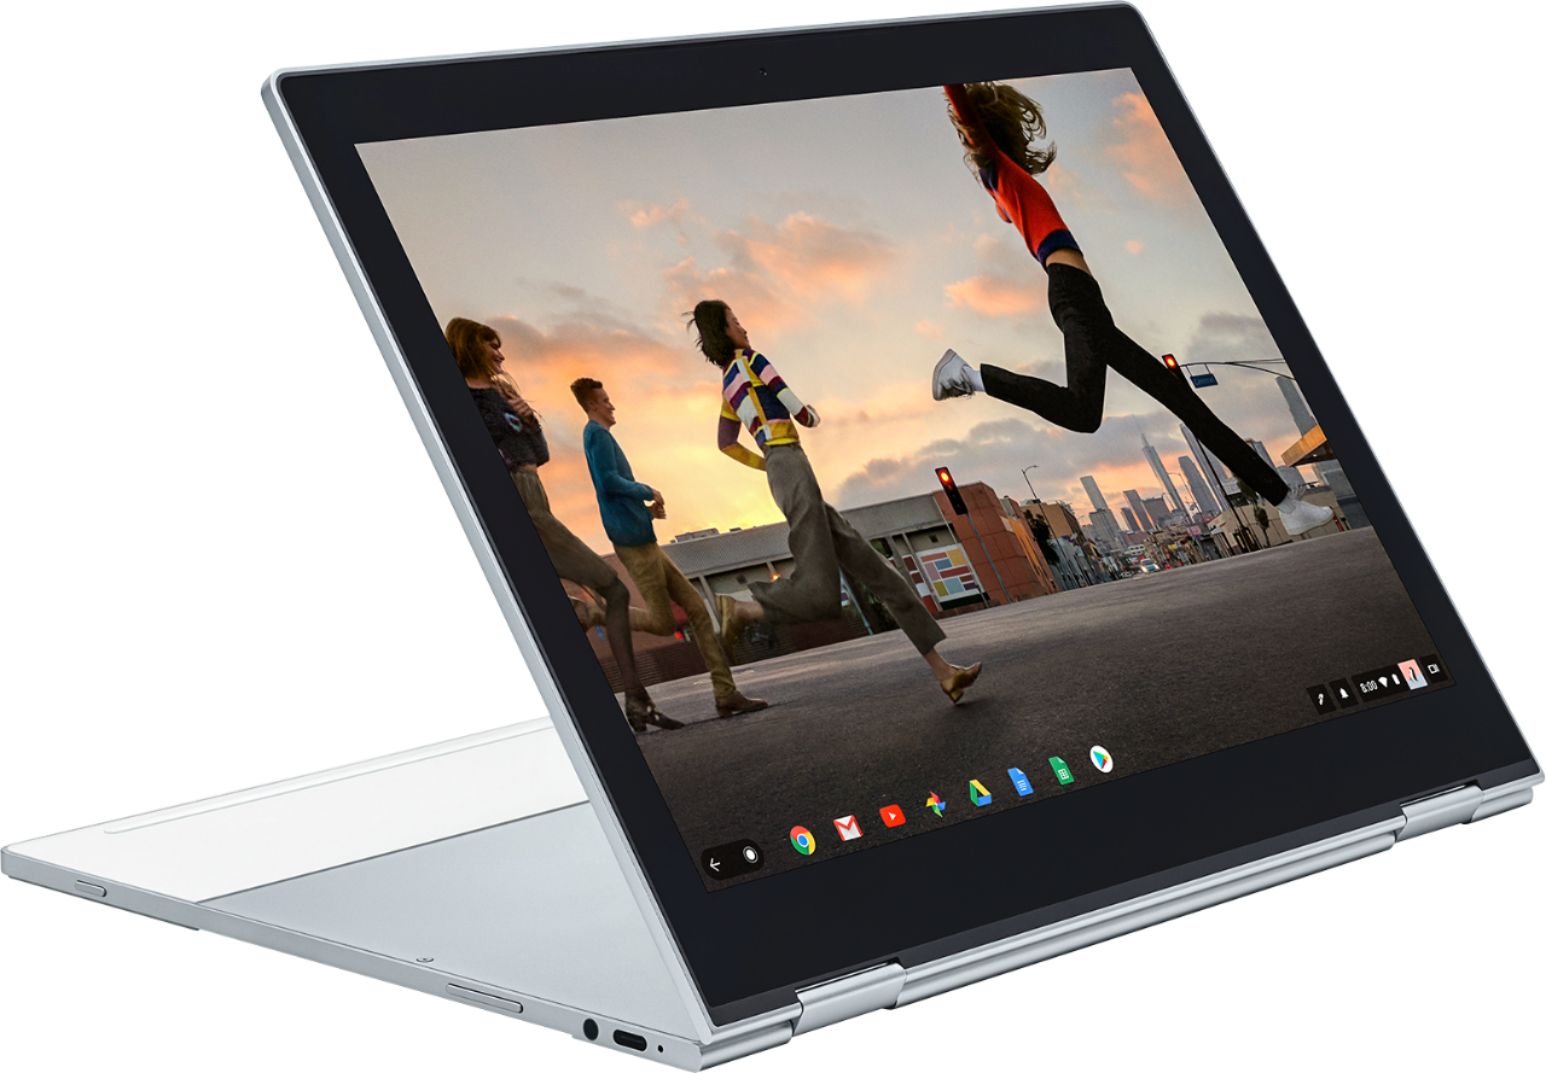 Reasons to Love the Google Pixelbook